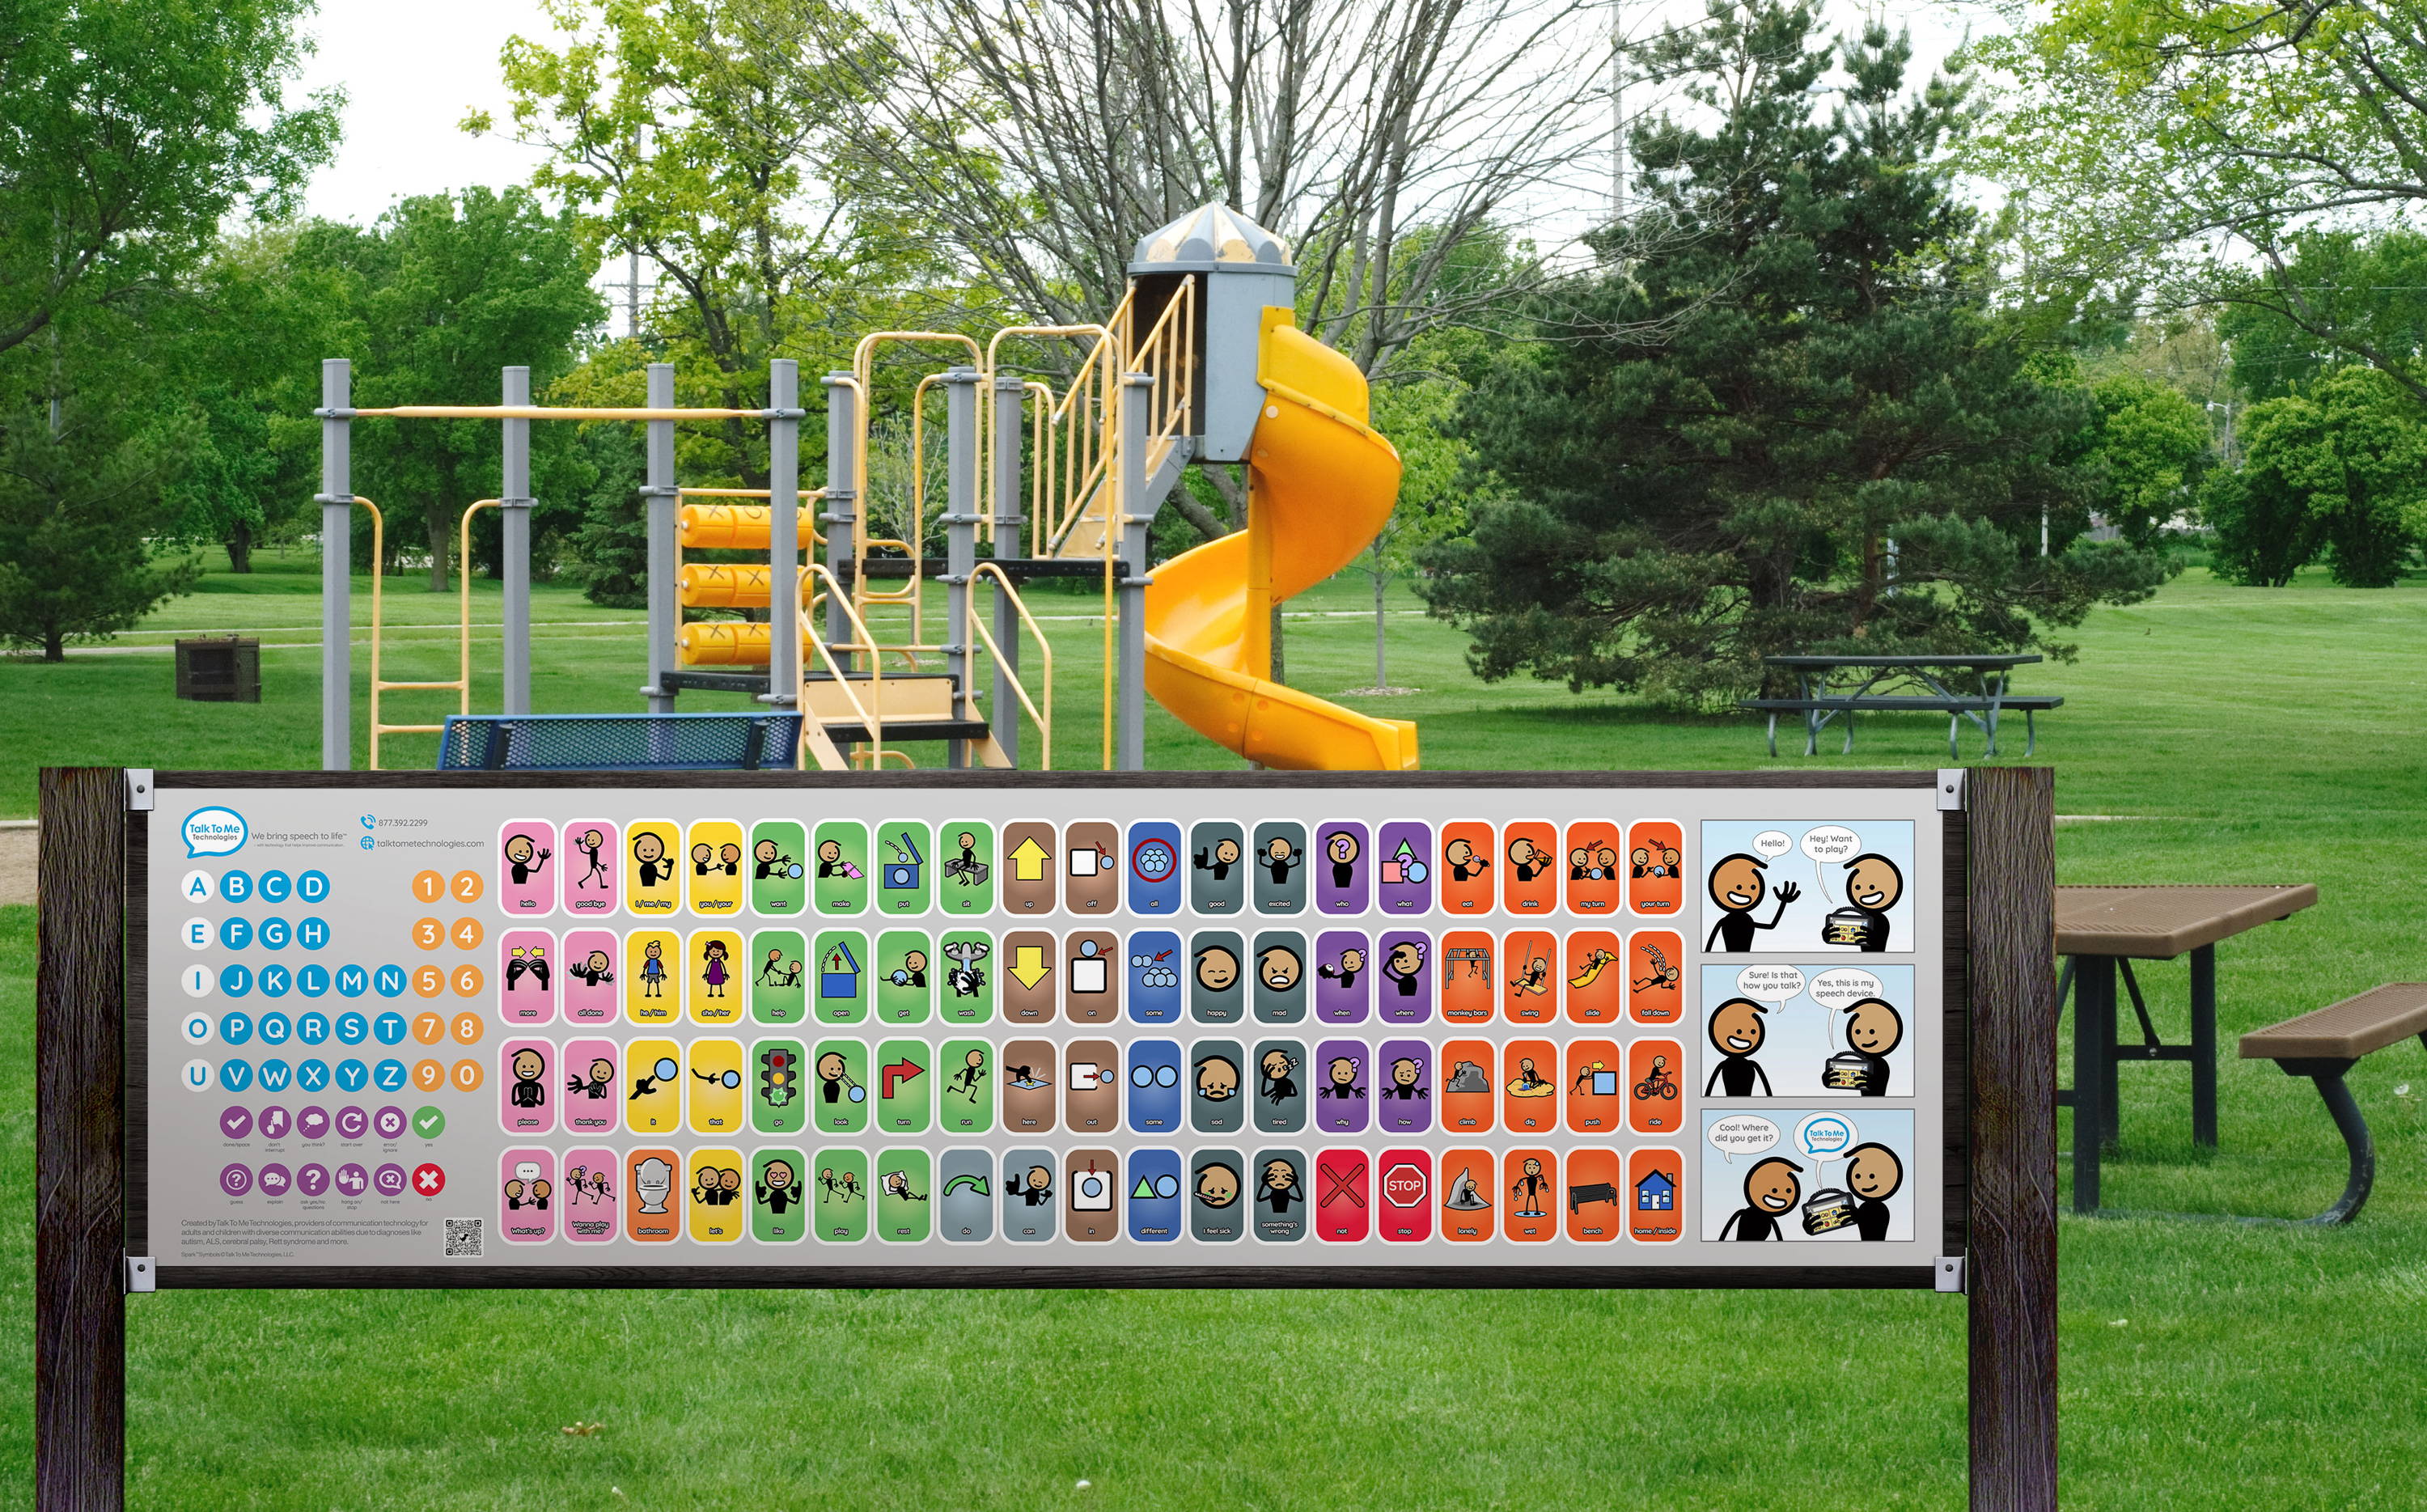 Post mount communication board at a playground